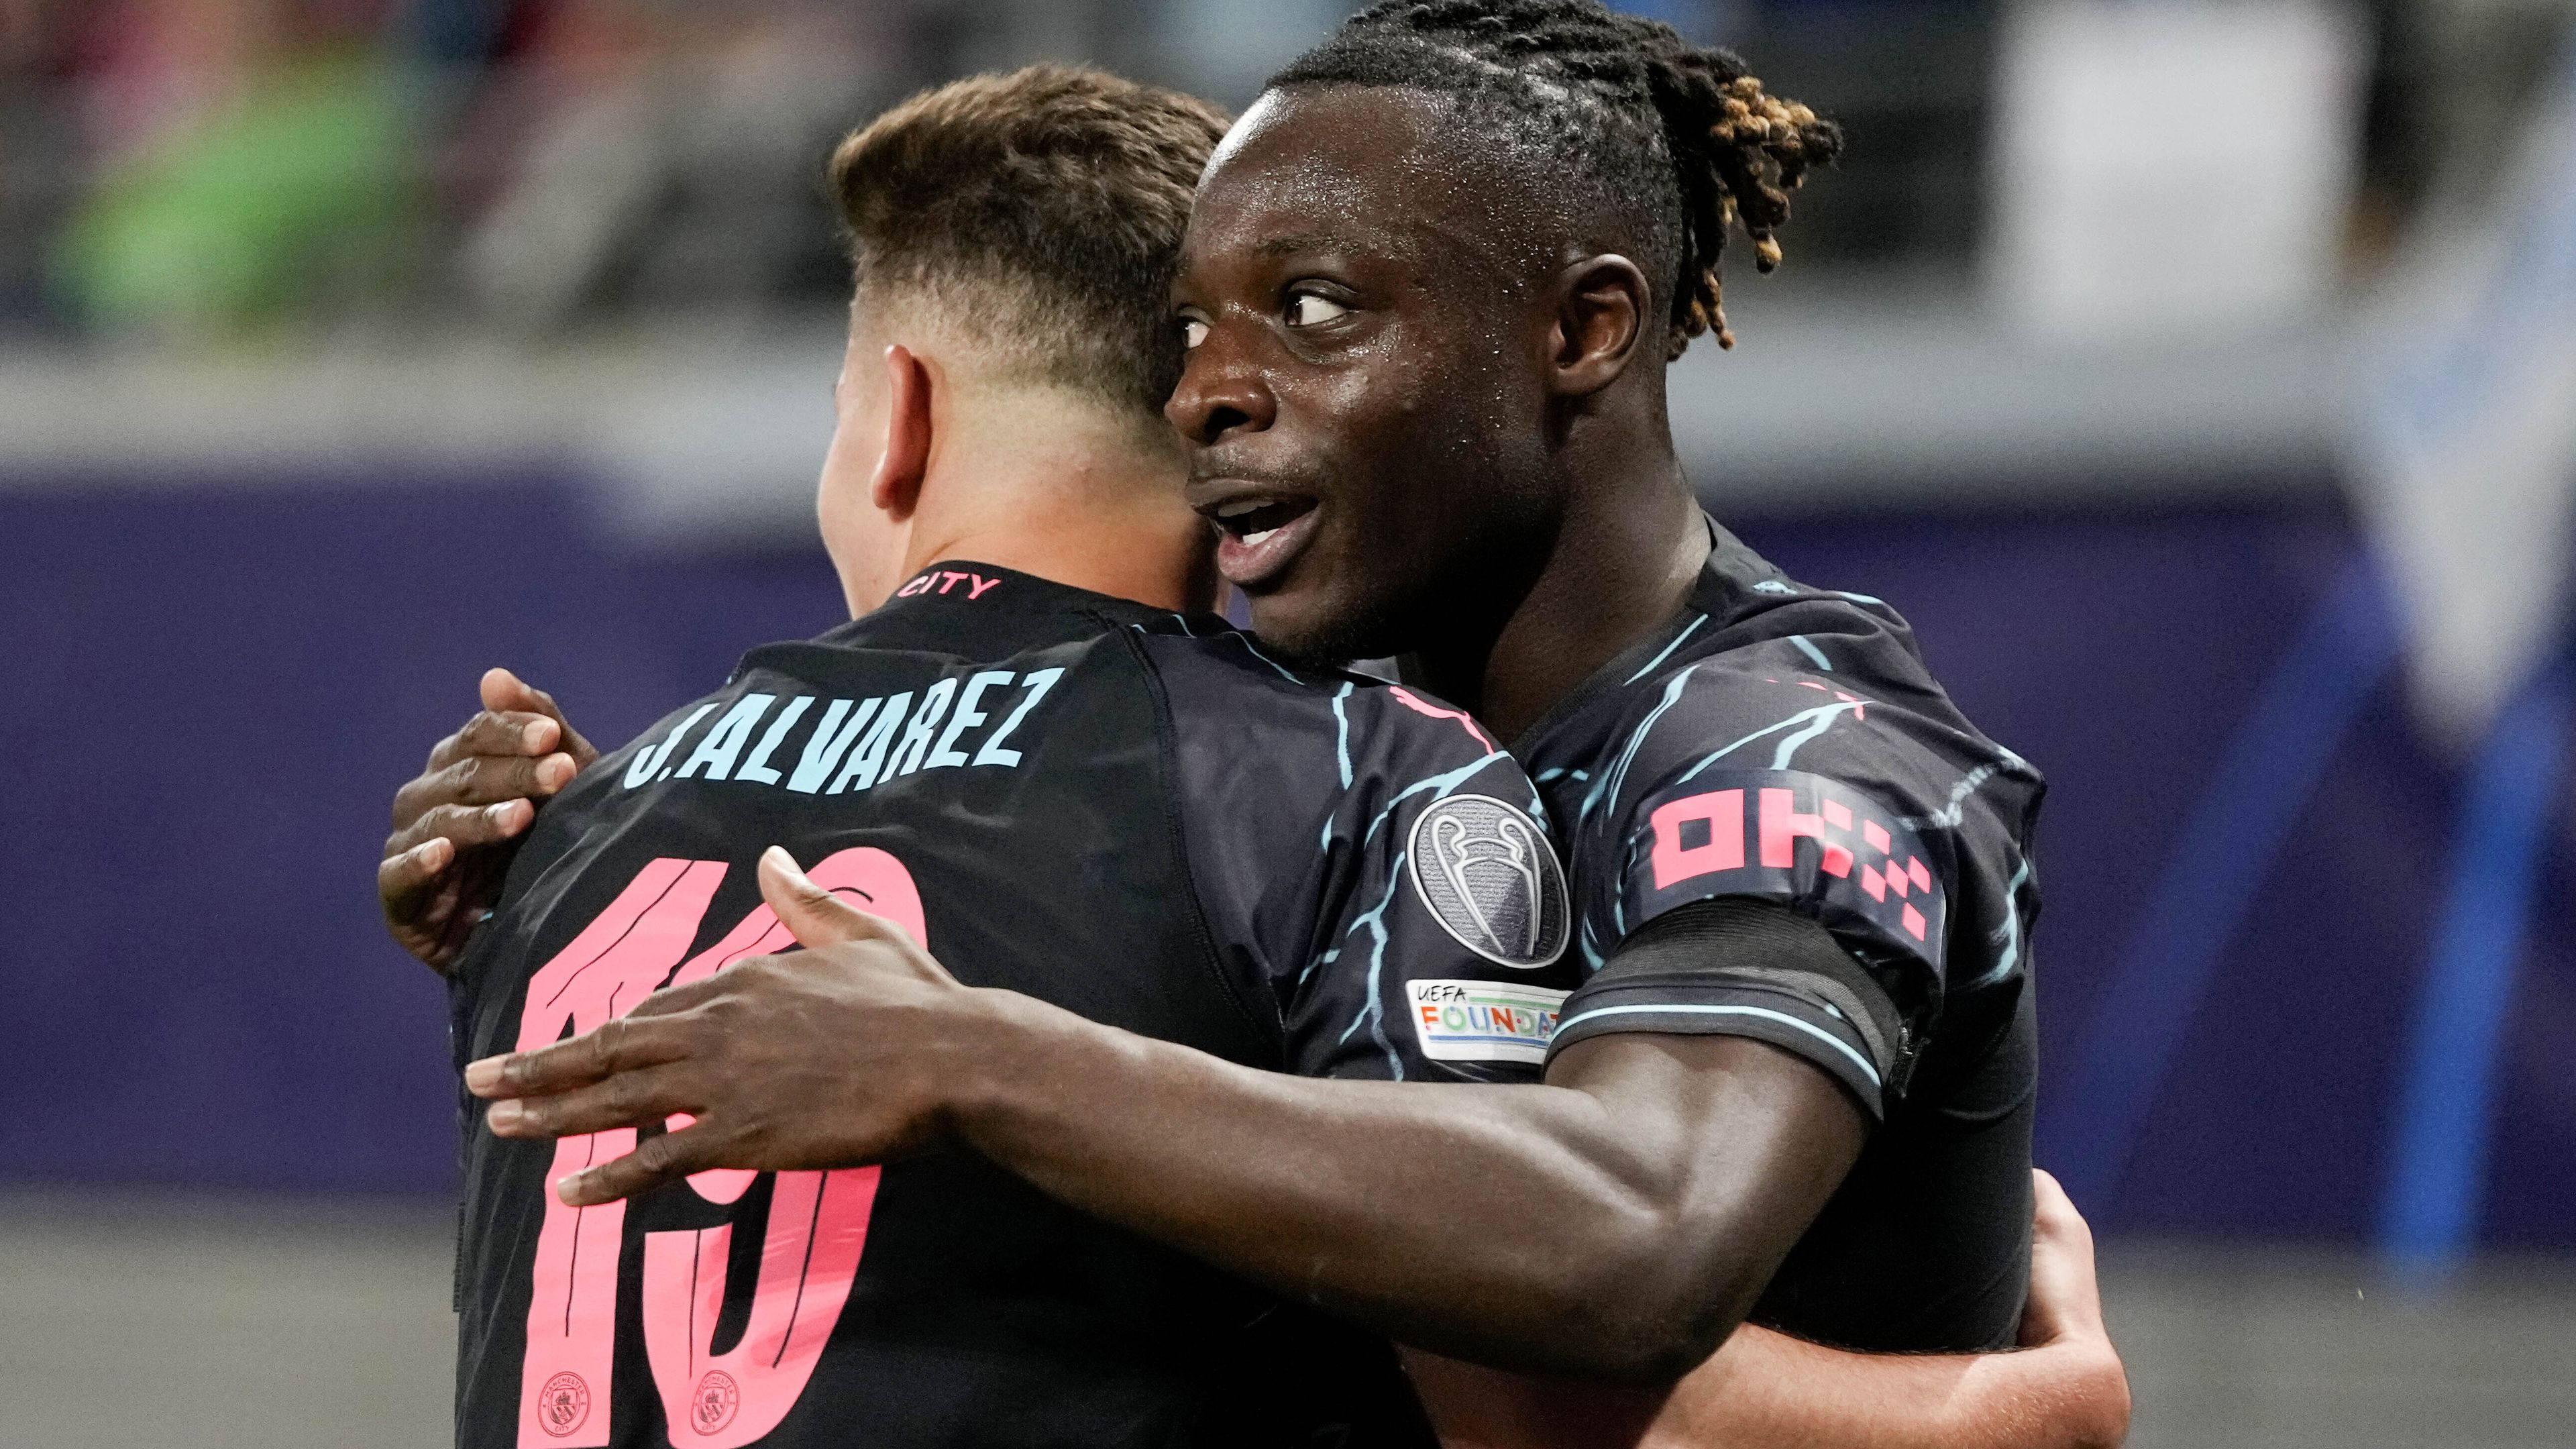 Manchester City substitutes combine for late goals in Champions League win at Leipzig